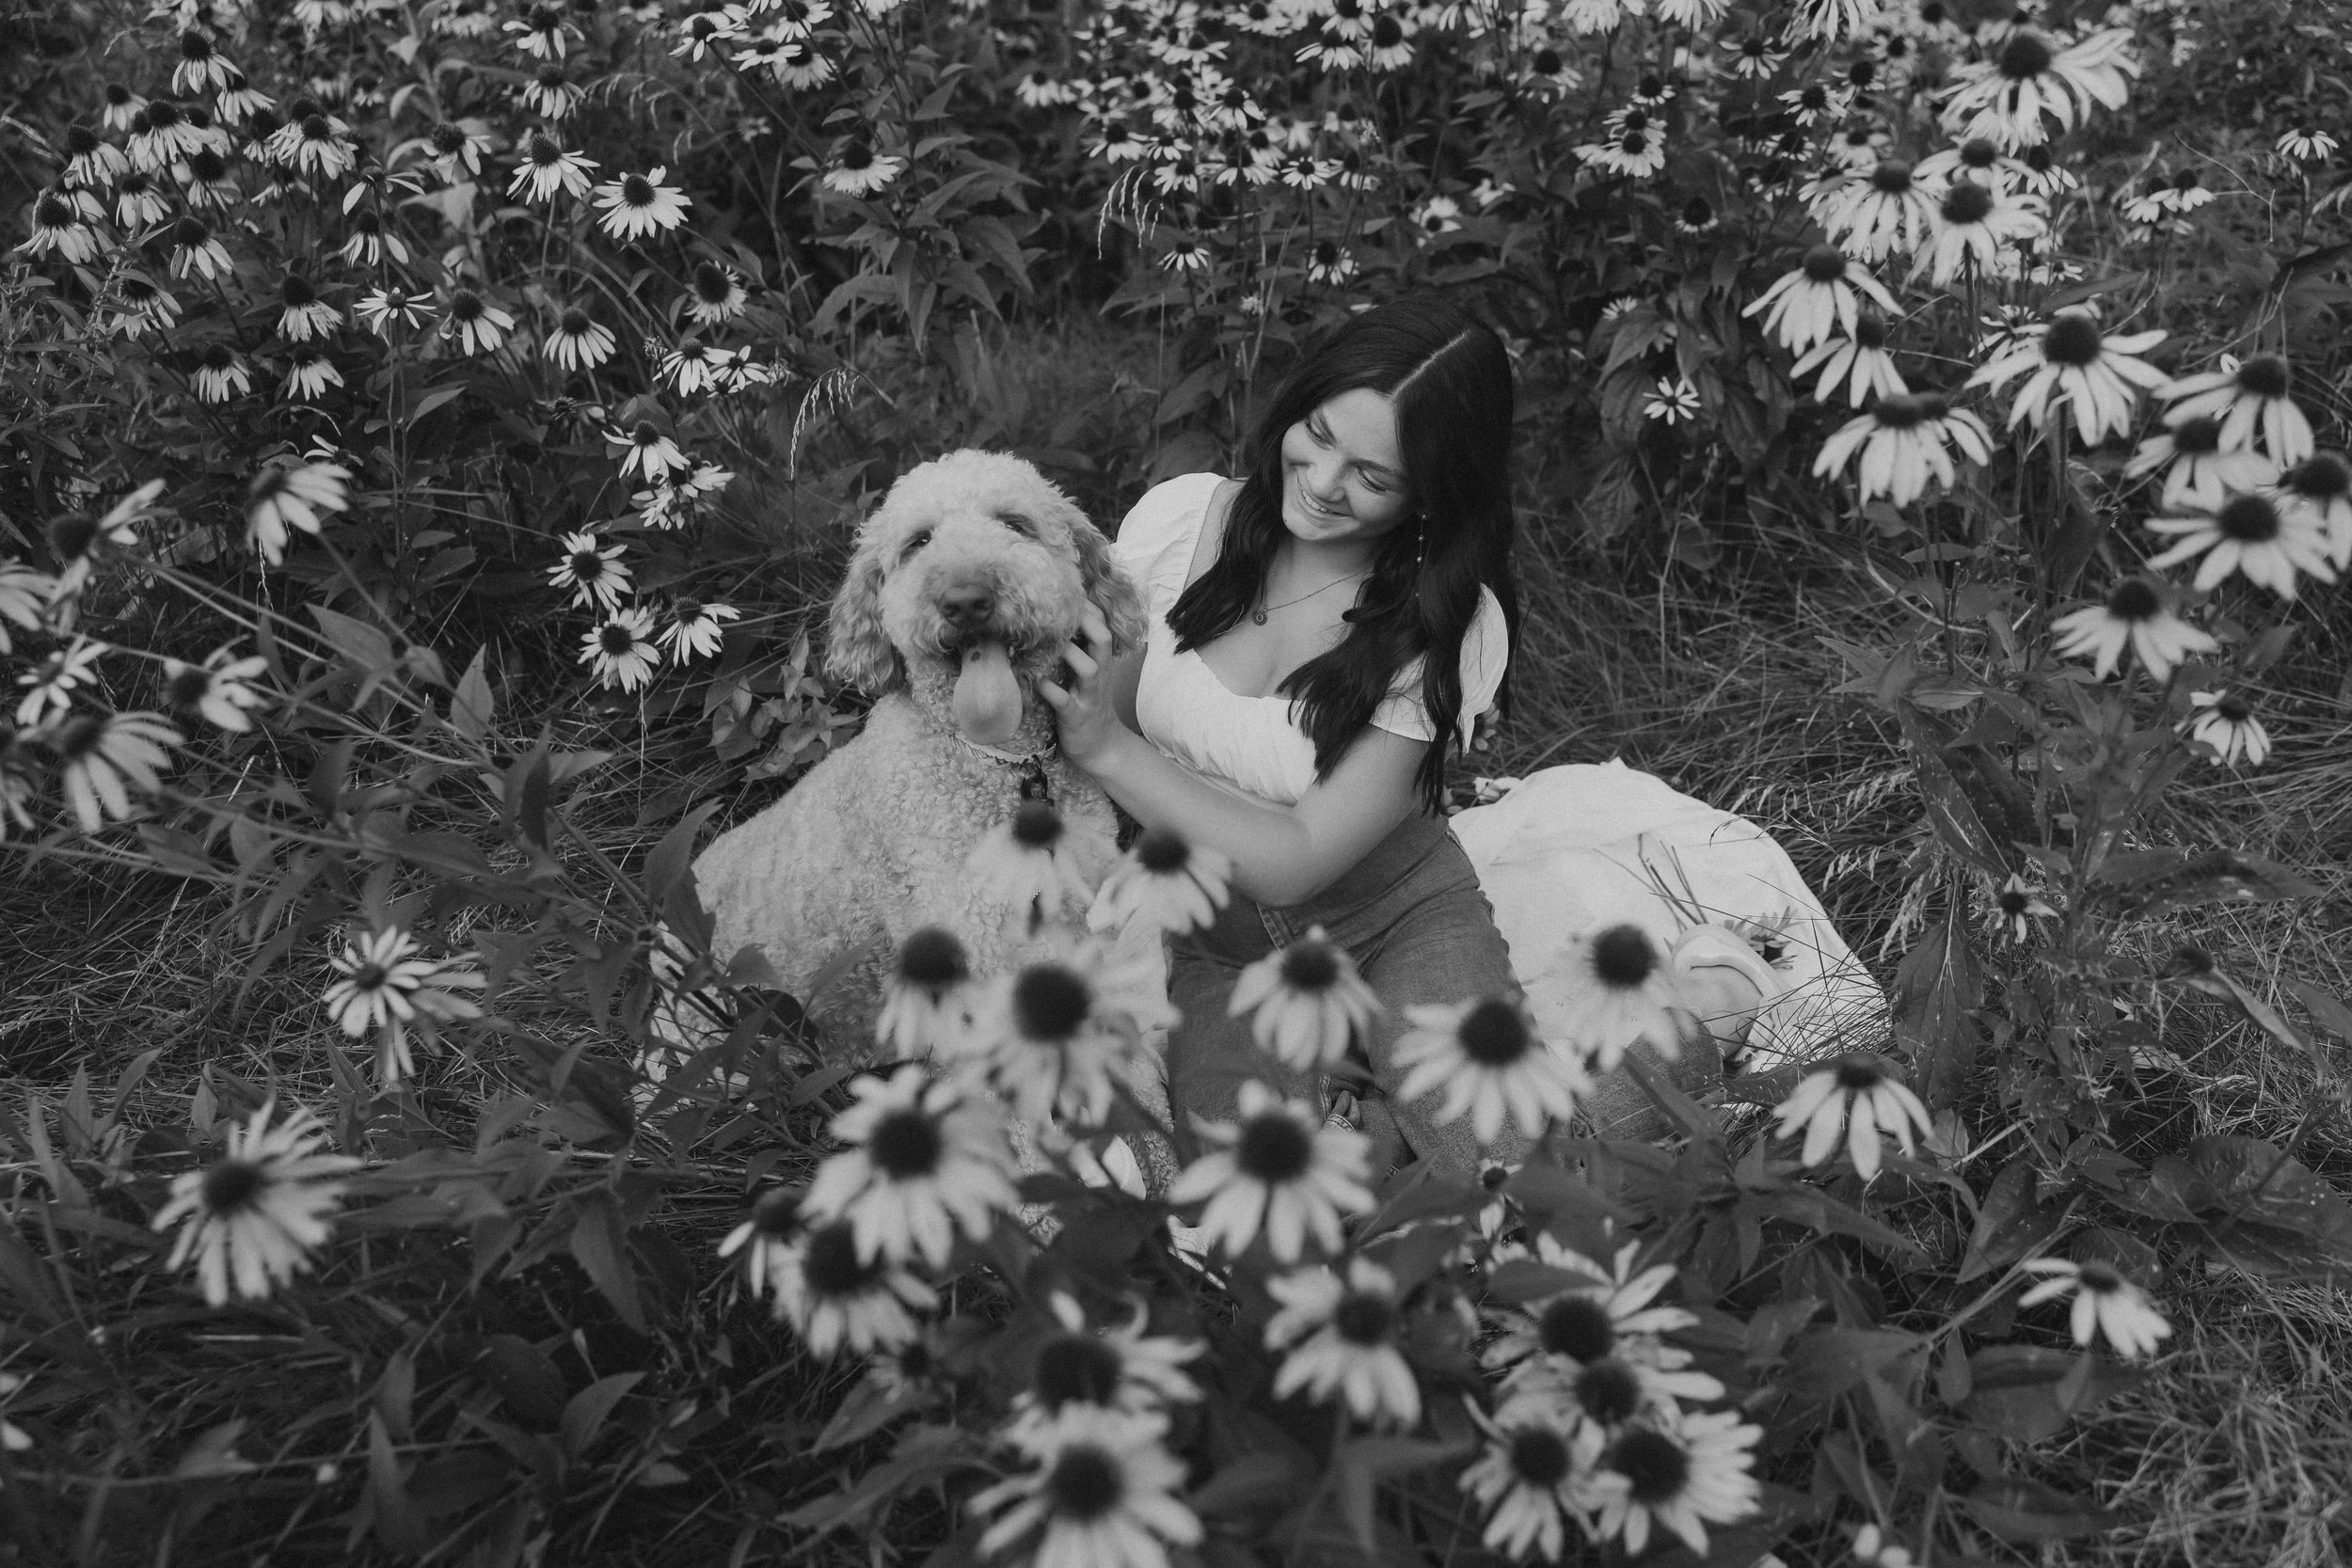  olivia looks over at her dog while petting him in a field of flowers for her senior pictures near me 